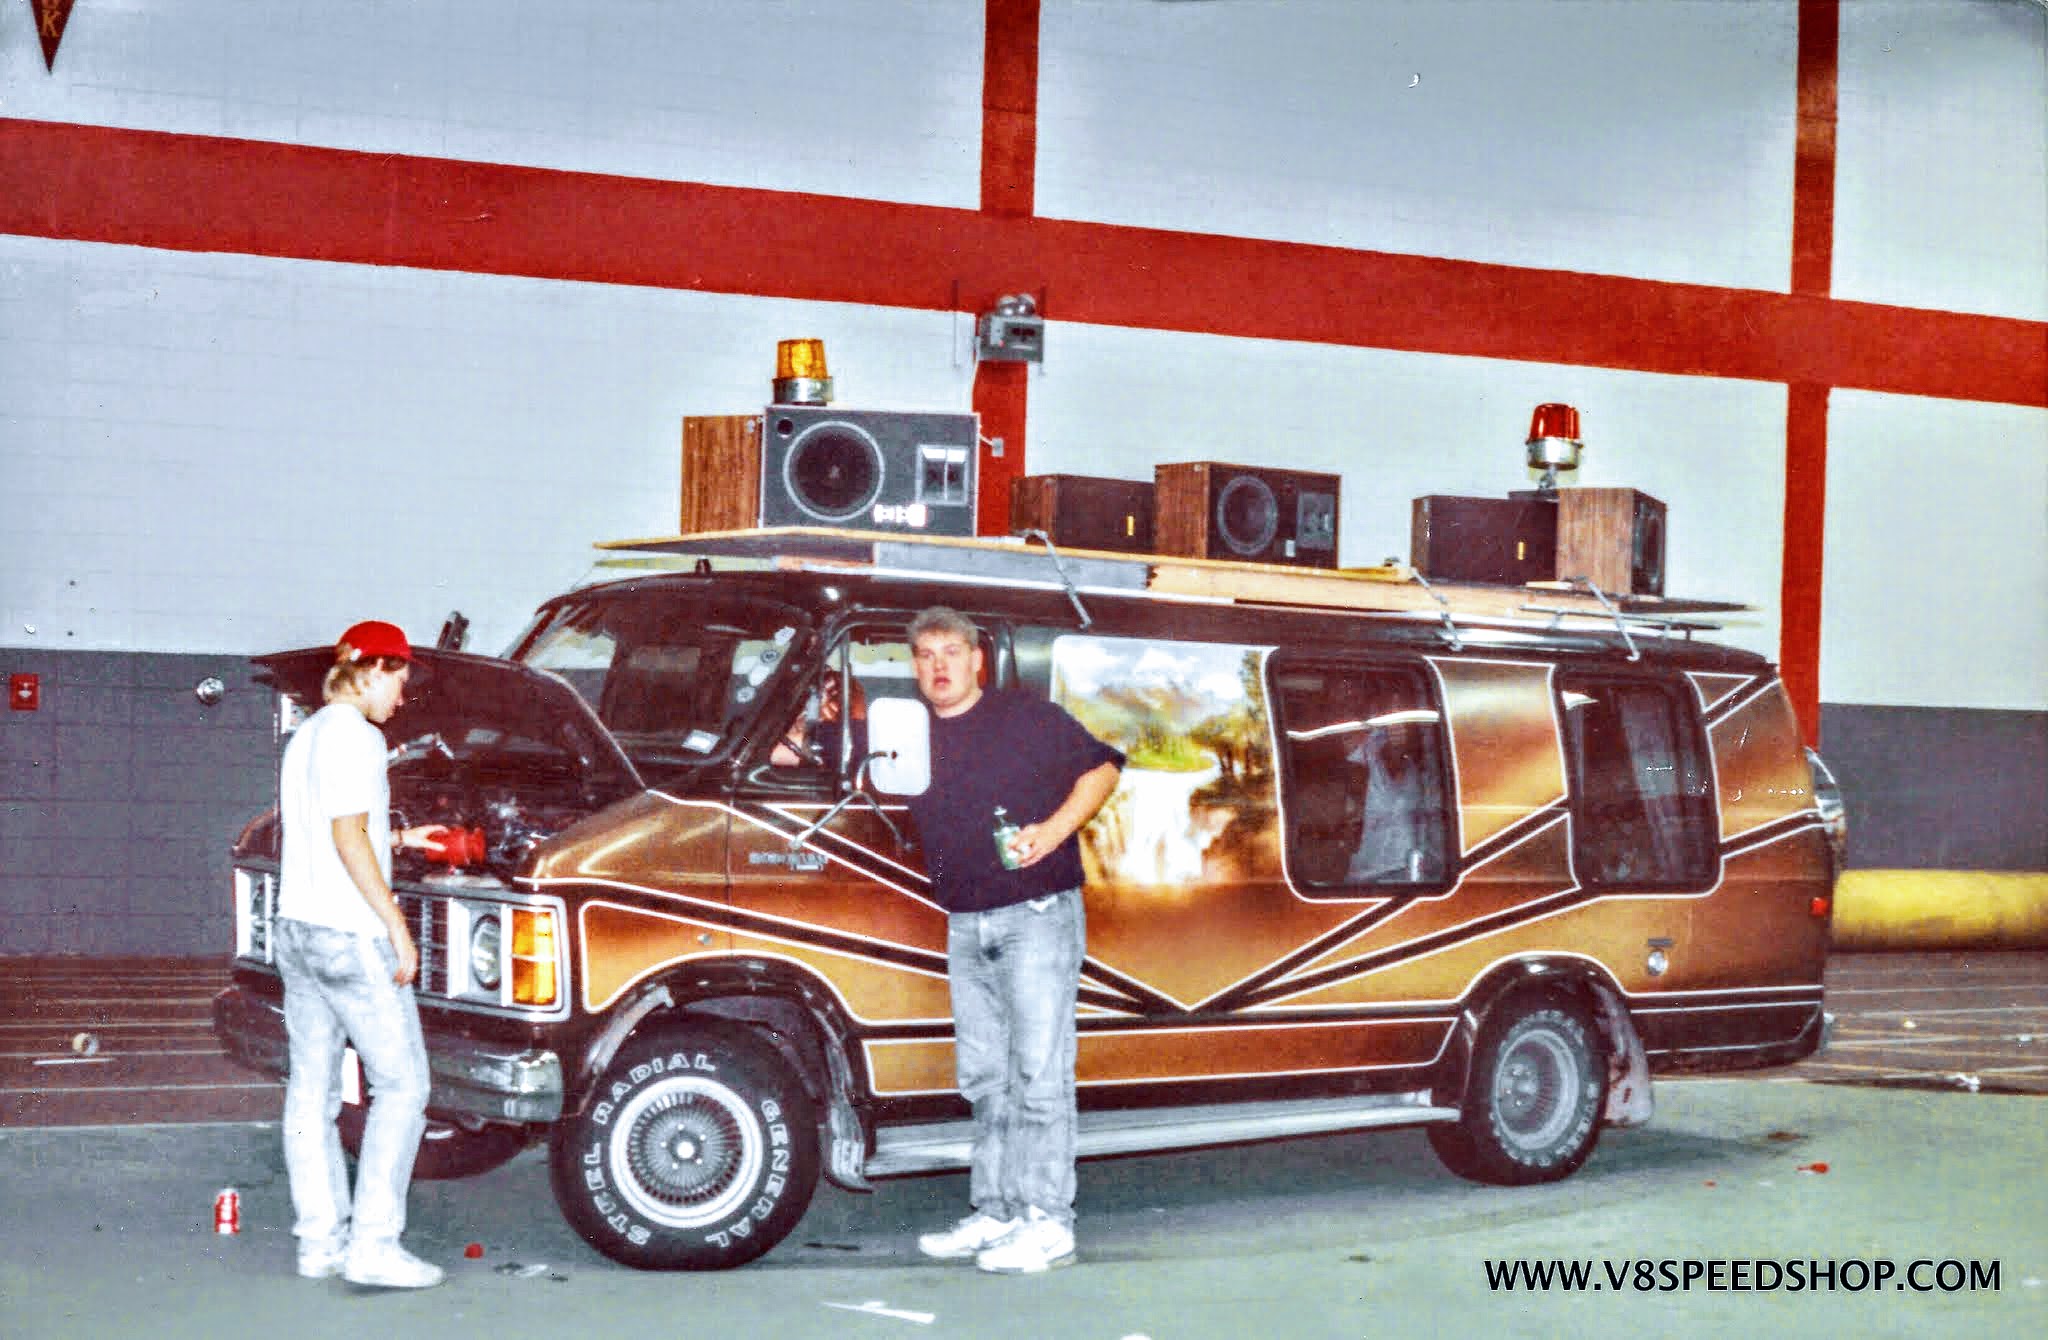 1979 Dodge B200 Maxivan custom conversion being prepared for the homecoming parade at Maine South high school 1989 Kevin Oeste